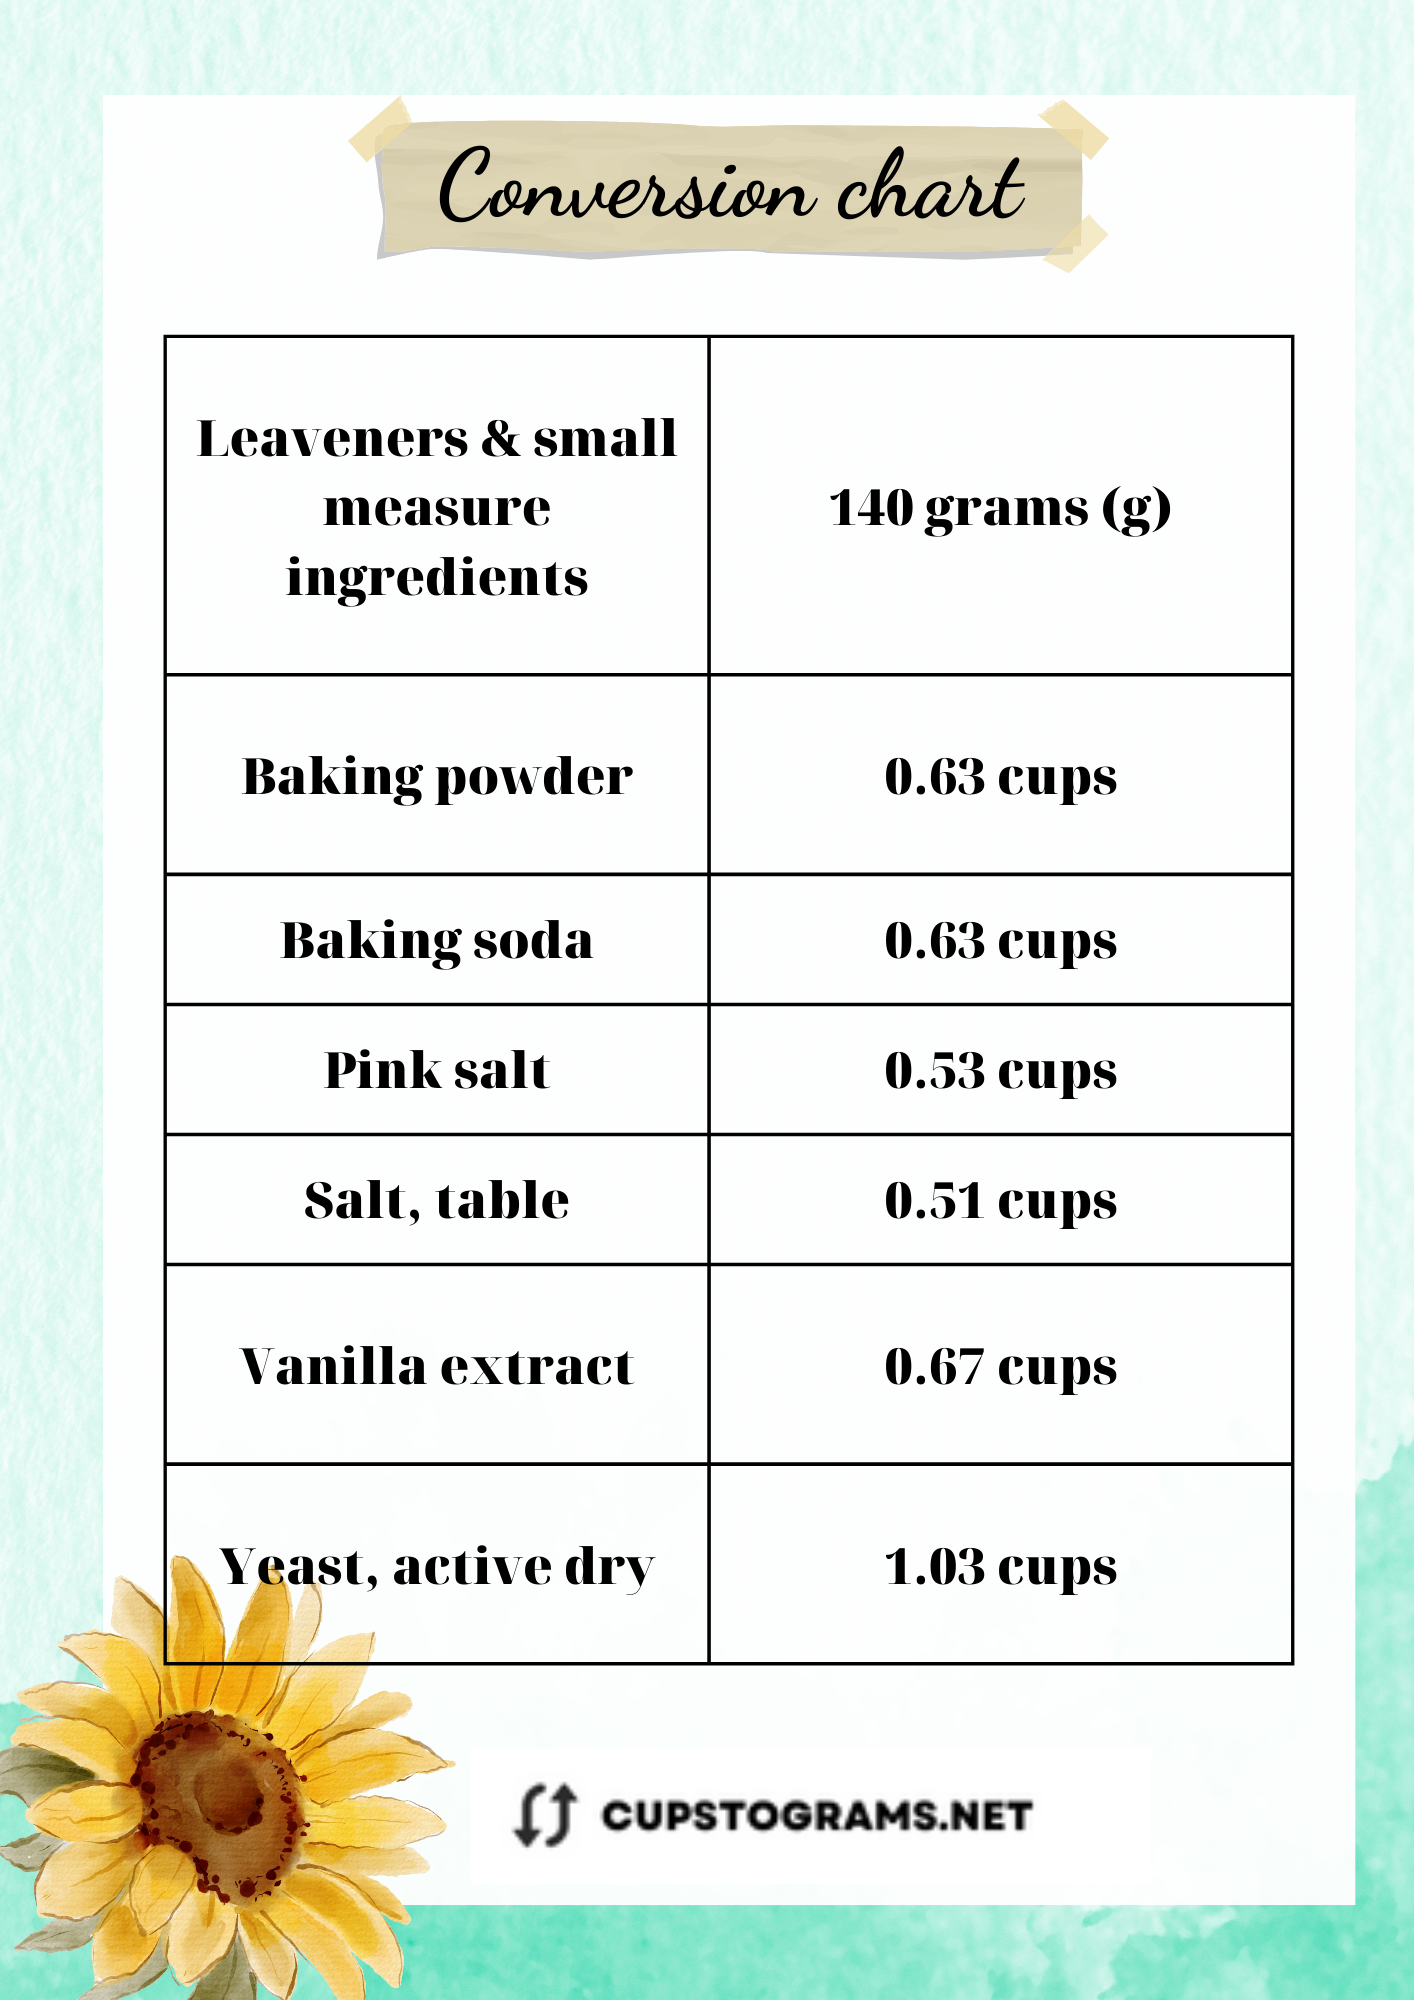 Conversion Chart: 140 Grams of Leaveners & small measure ingredients to Cups